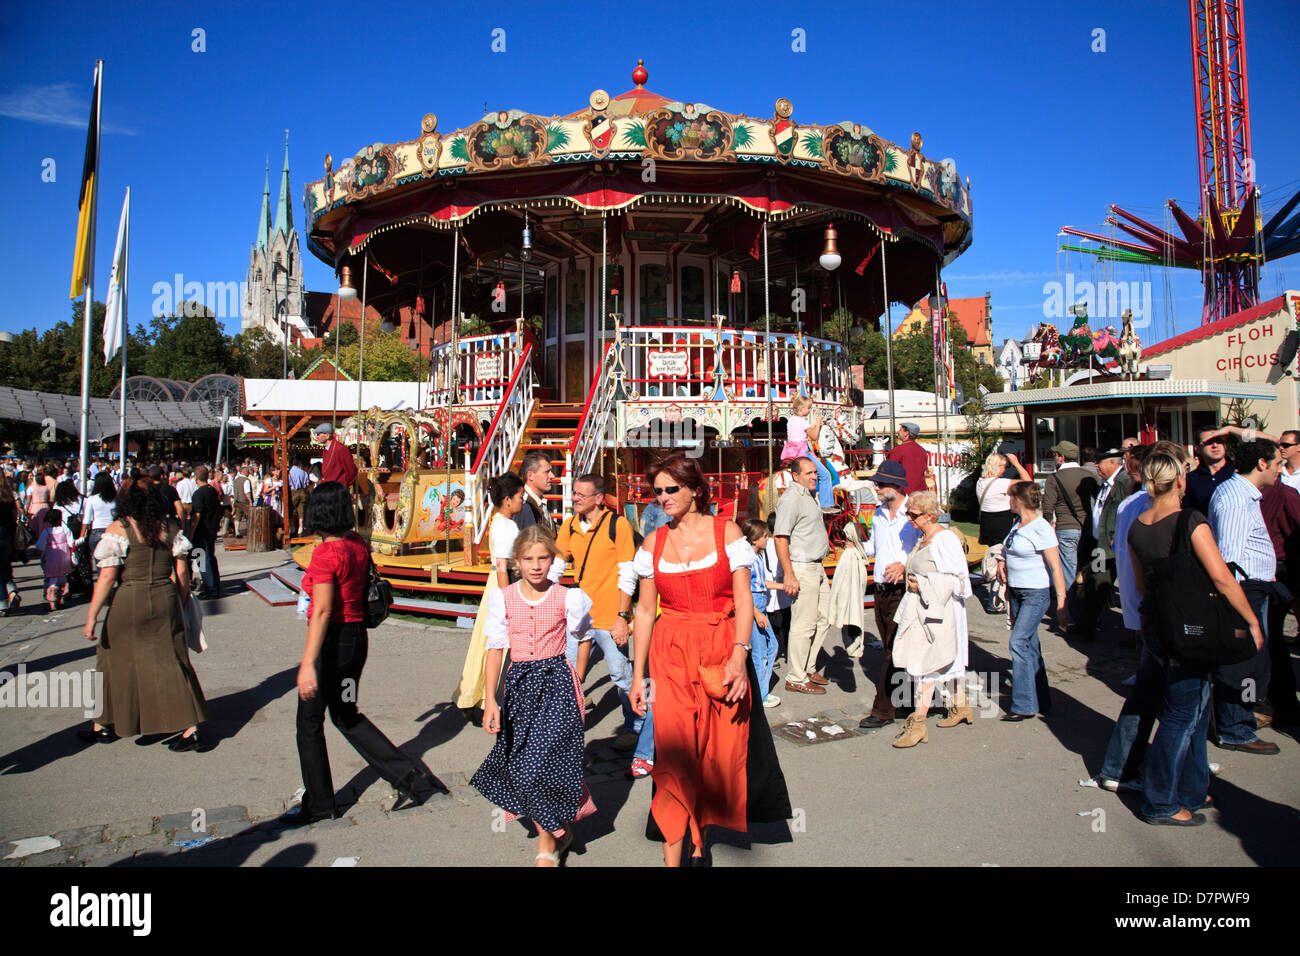 Oktoberfest, traditional carousel at Theresienwiese fairground, Munich, Bavaria, Germany Stock Photo